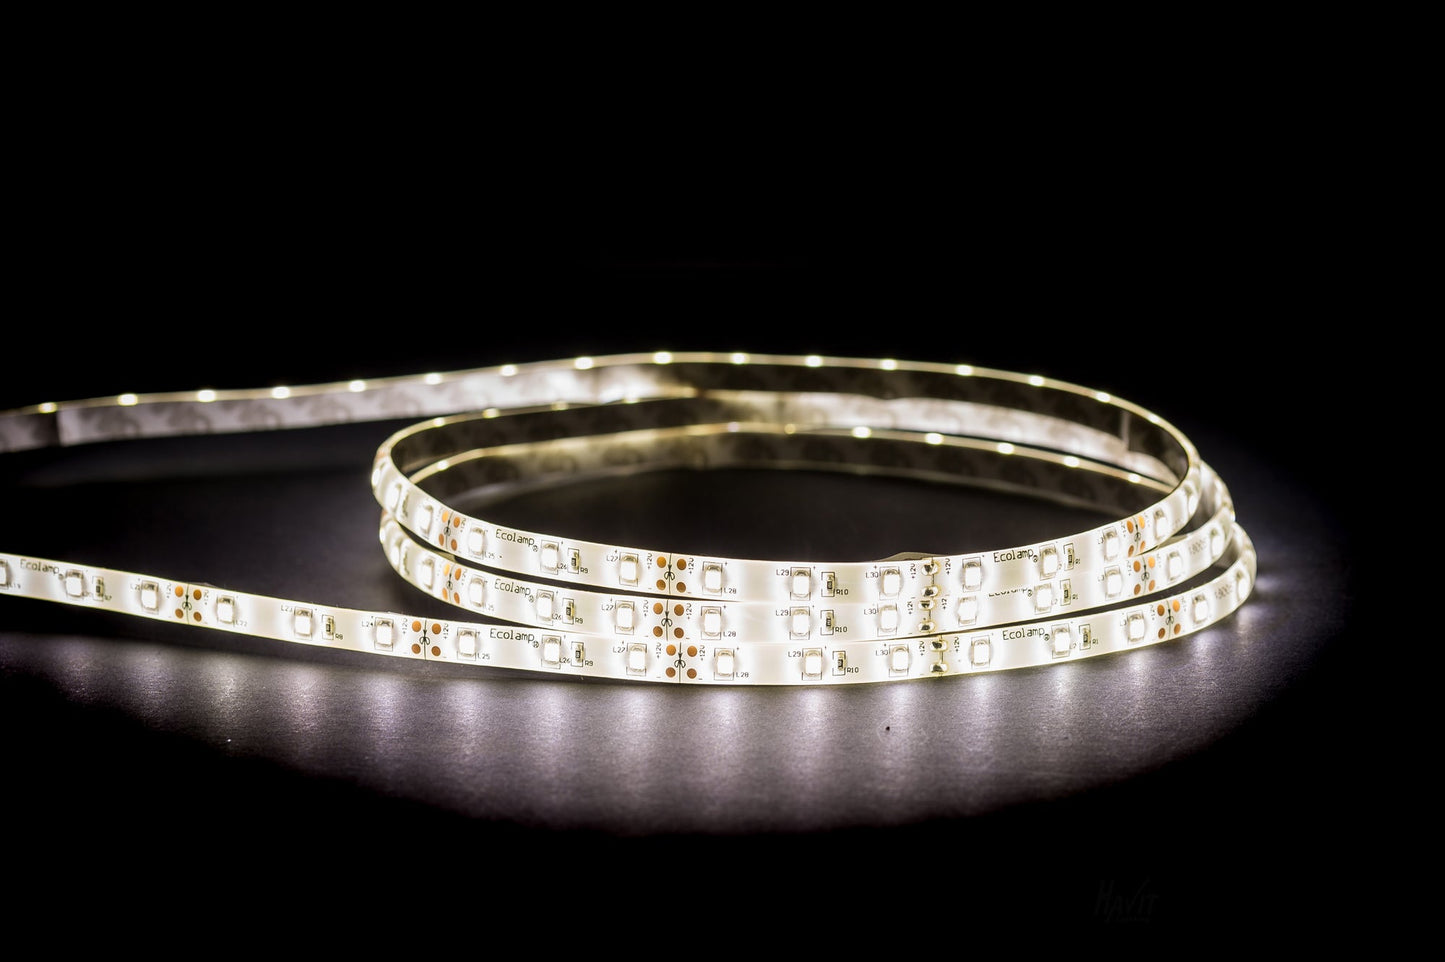 4.8w Per Metre 5m LED Strip Kit - Ip54 Complete With LED Driver  Vpr9734ip54-60-5m